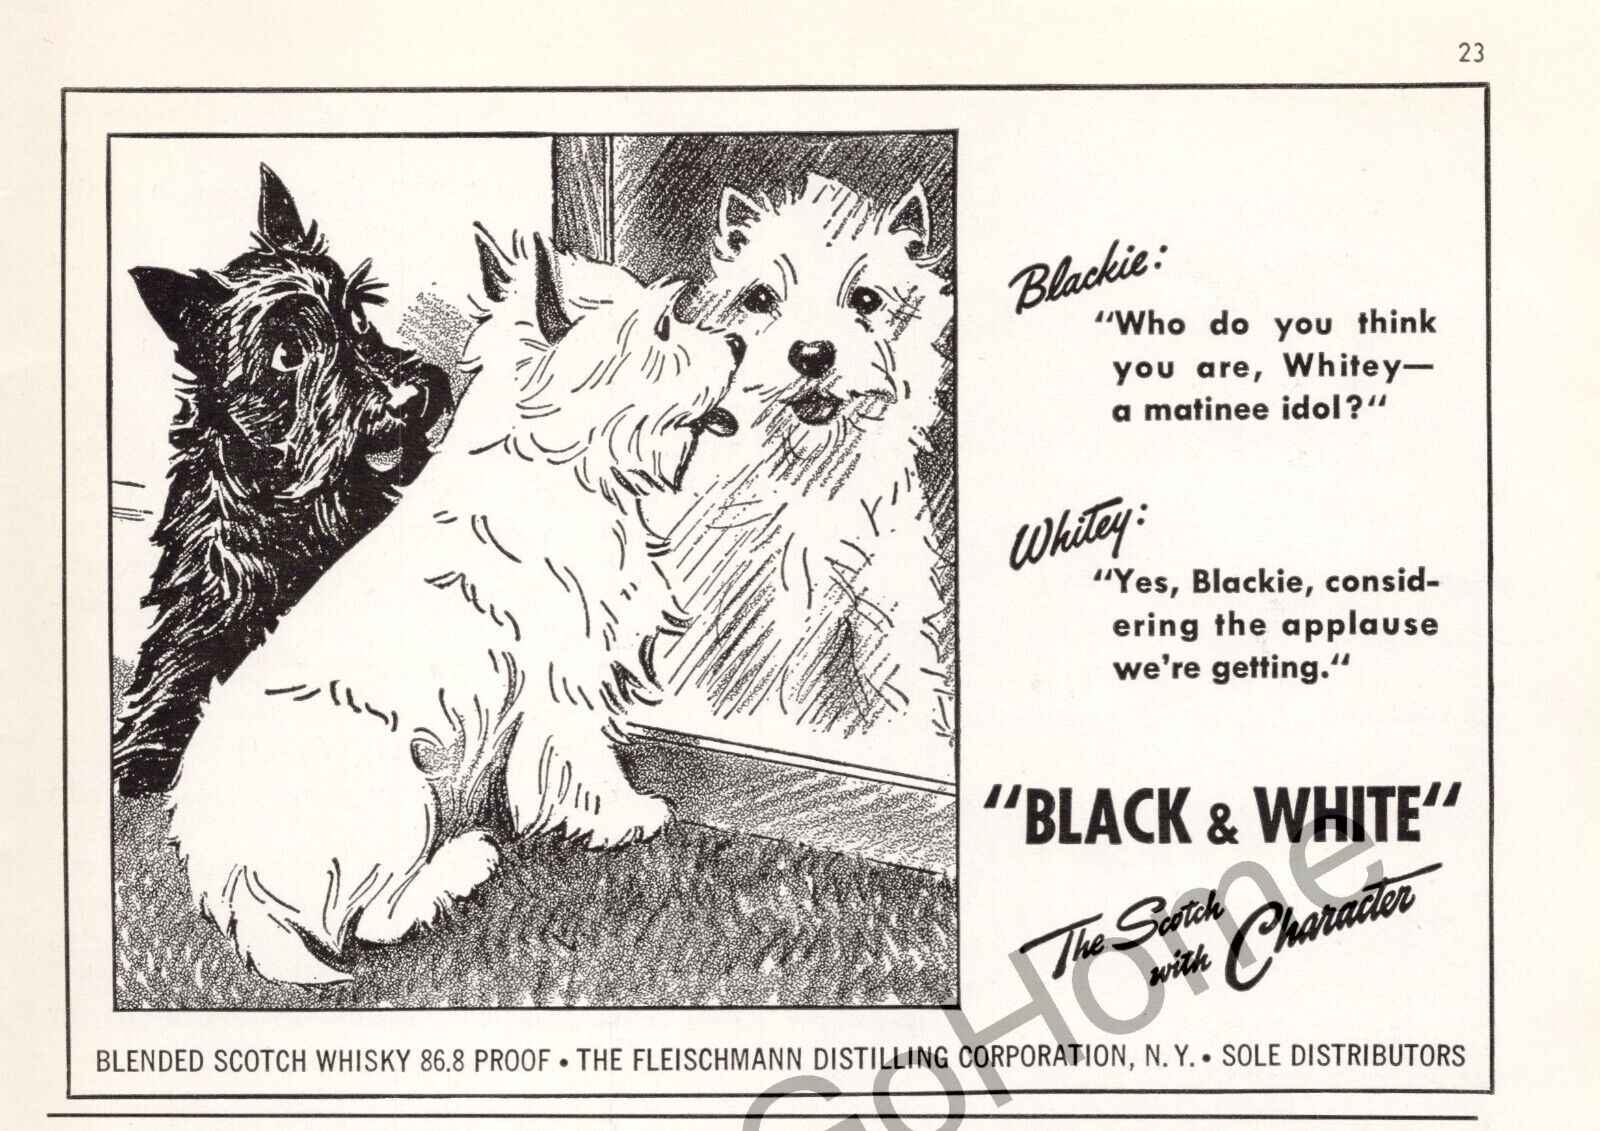 Black and White the Scotch with Character Blended Whiskey Blackie Whitey Ad 1950